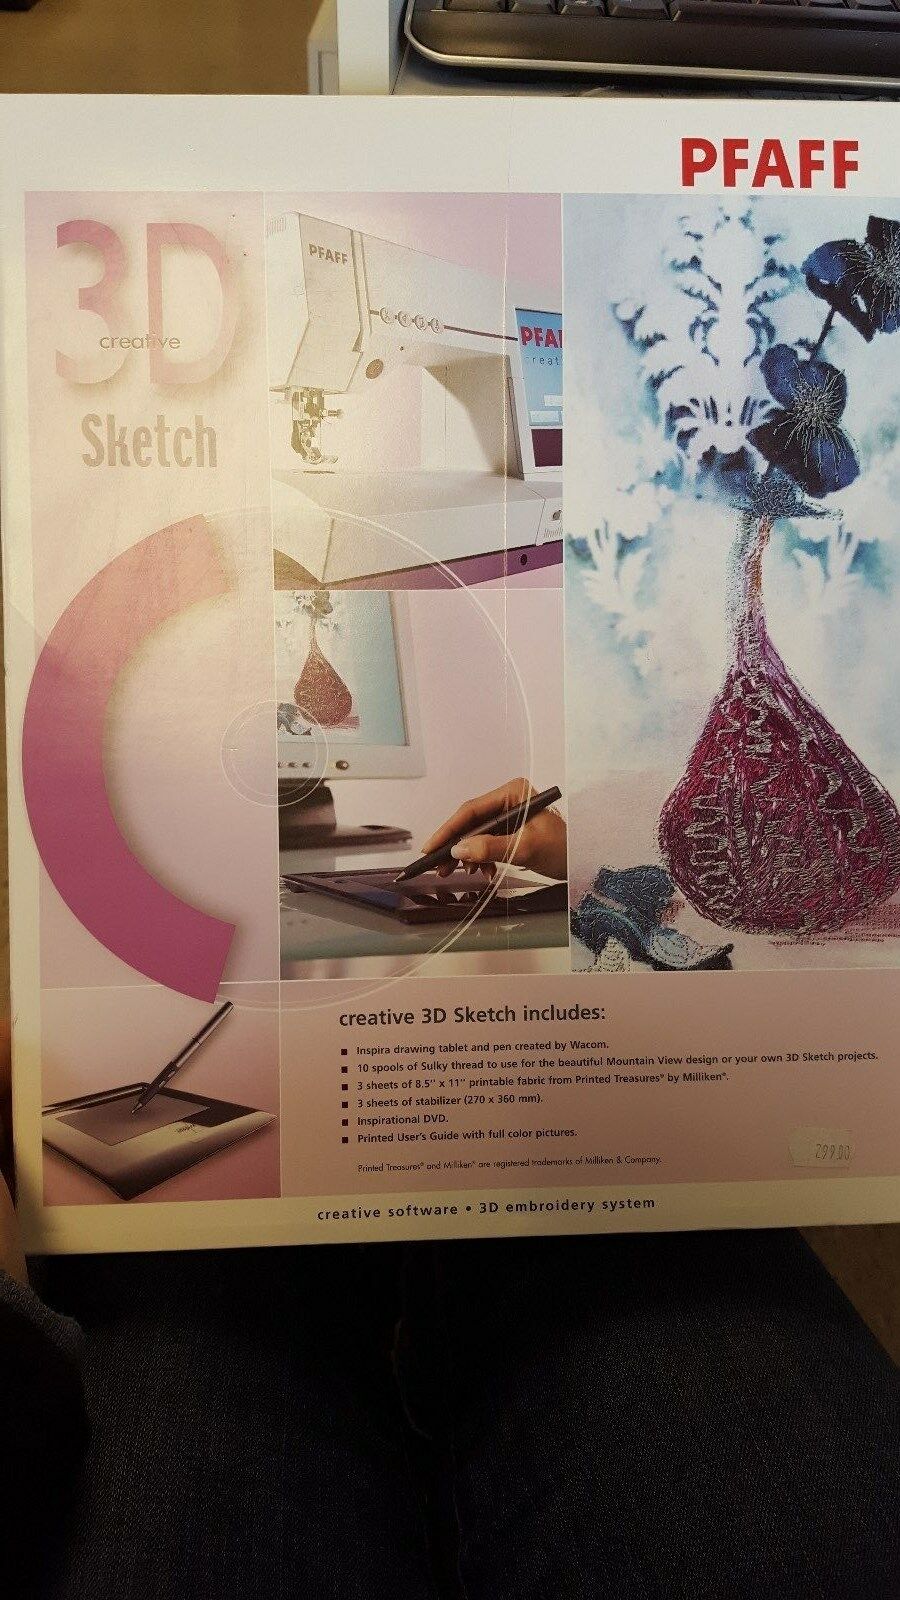 Pfaff 3D Creative Sketch Embroidery Software